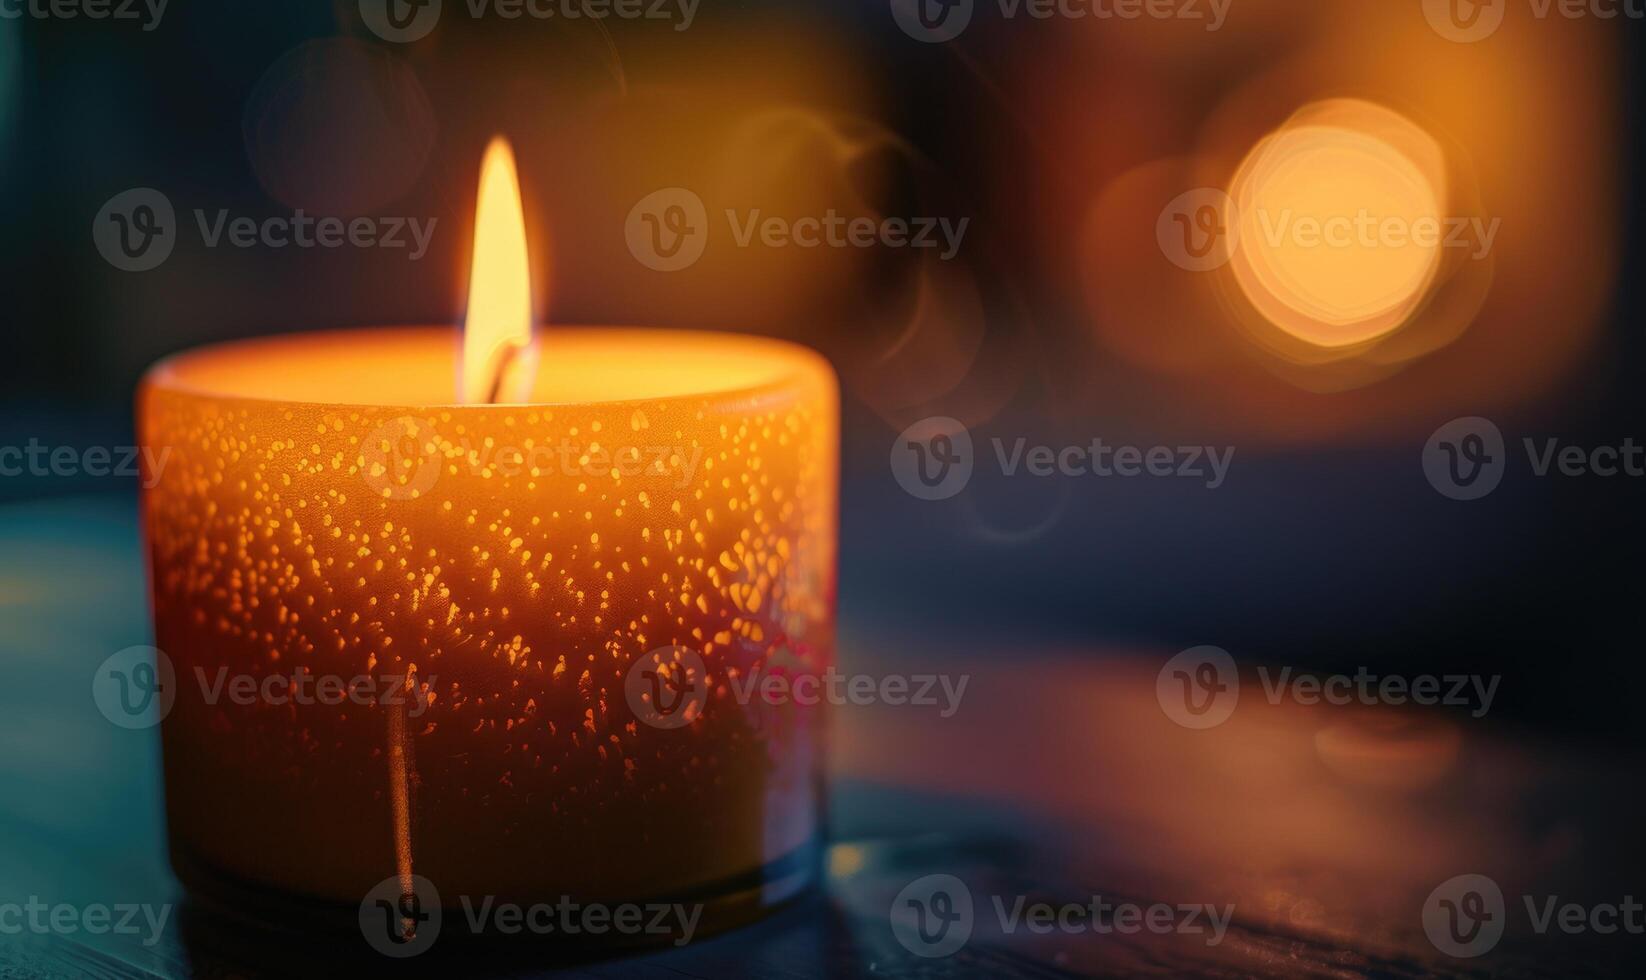 Close-up of a candle's gentle flicker illuminating a serene setting photo